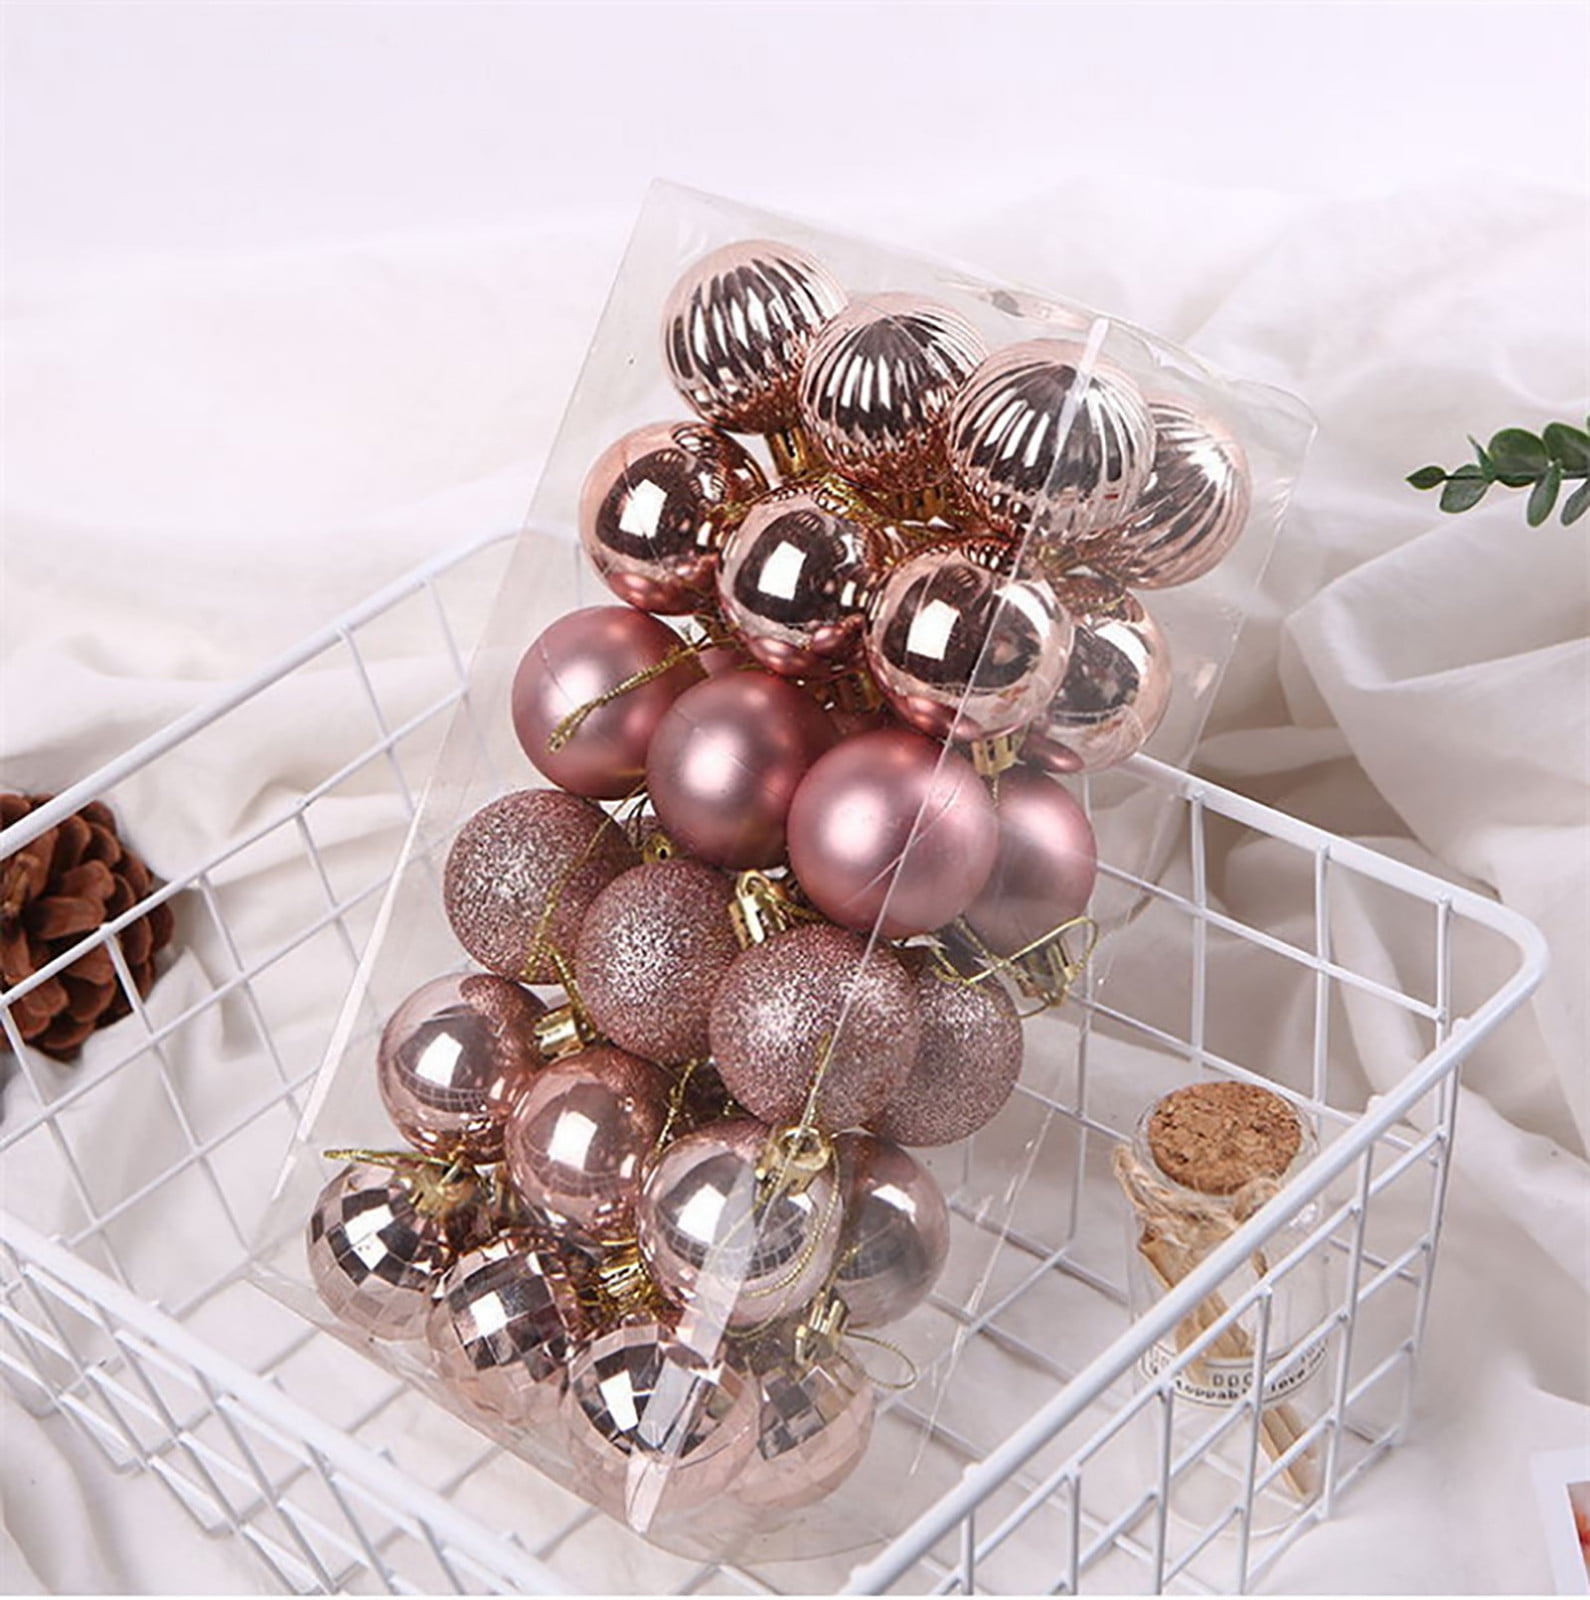 ZKCCNUK Christmas Decoration Gifts Under 40mm Christmas Xmas Tree Ball Bauble Hanging Home Party Ornament Decor 36pc Room Decor on Clearance, Brown